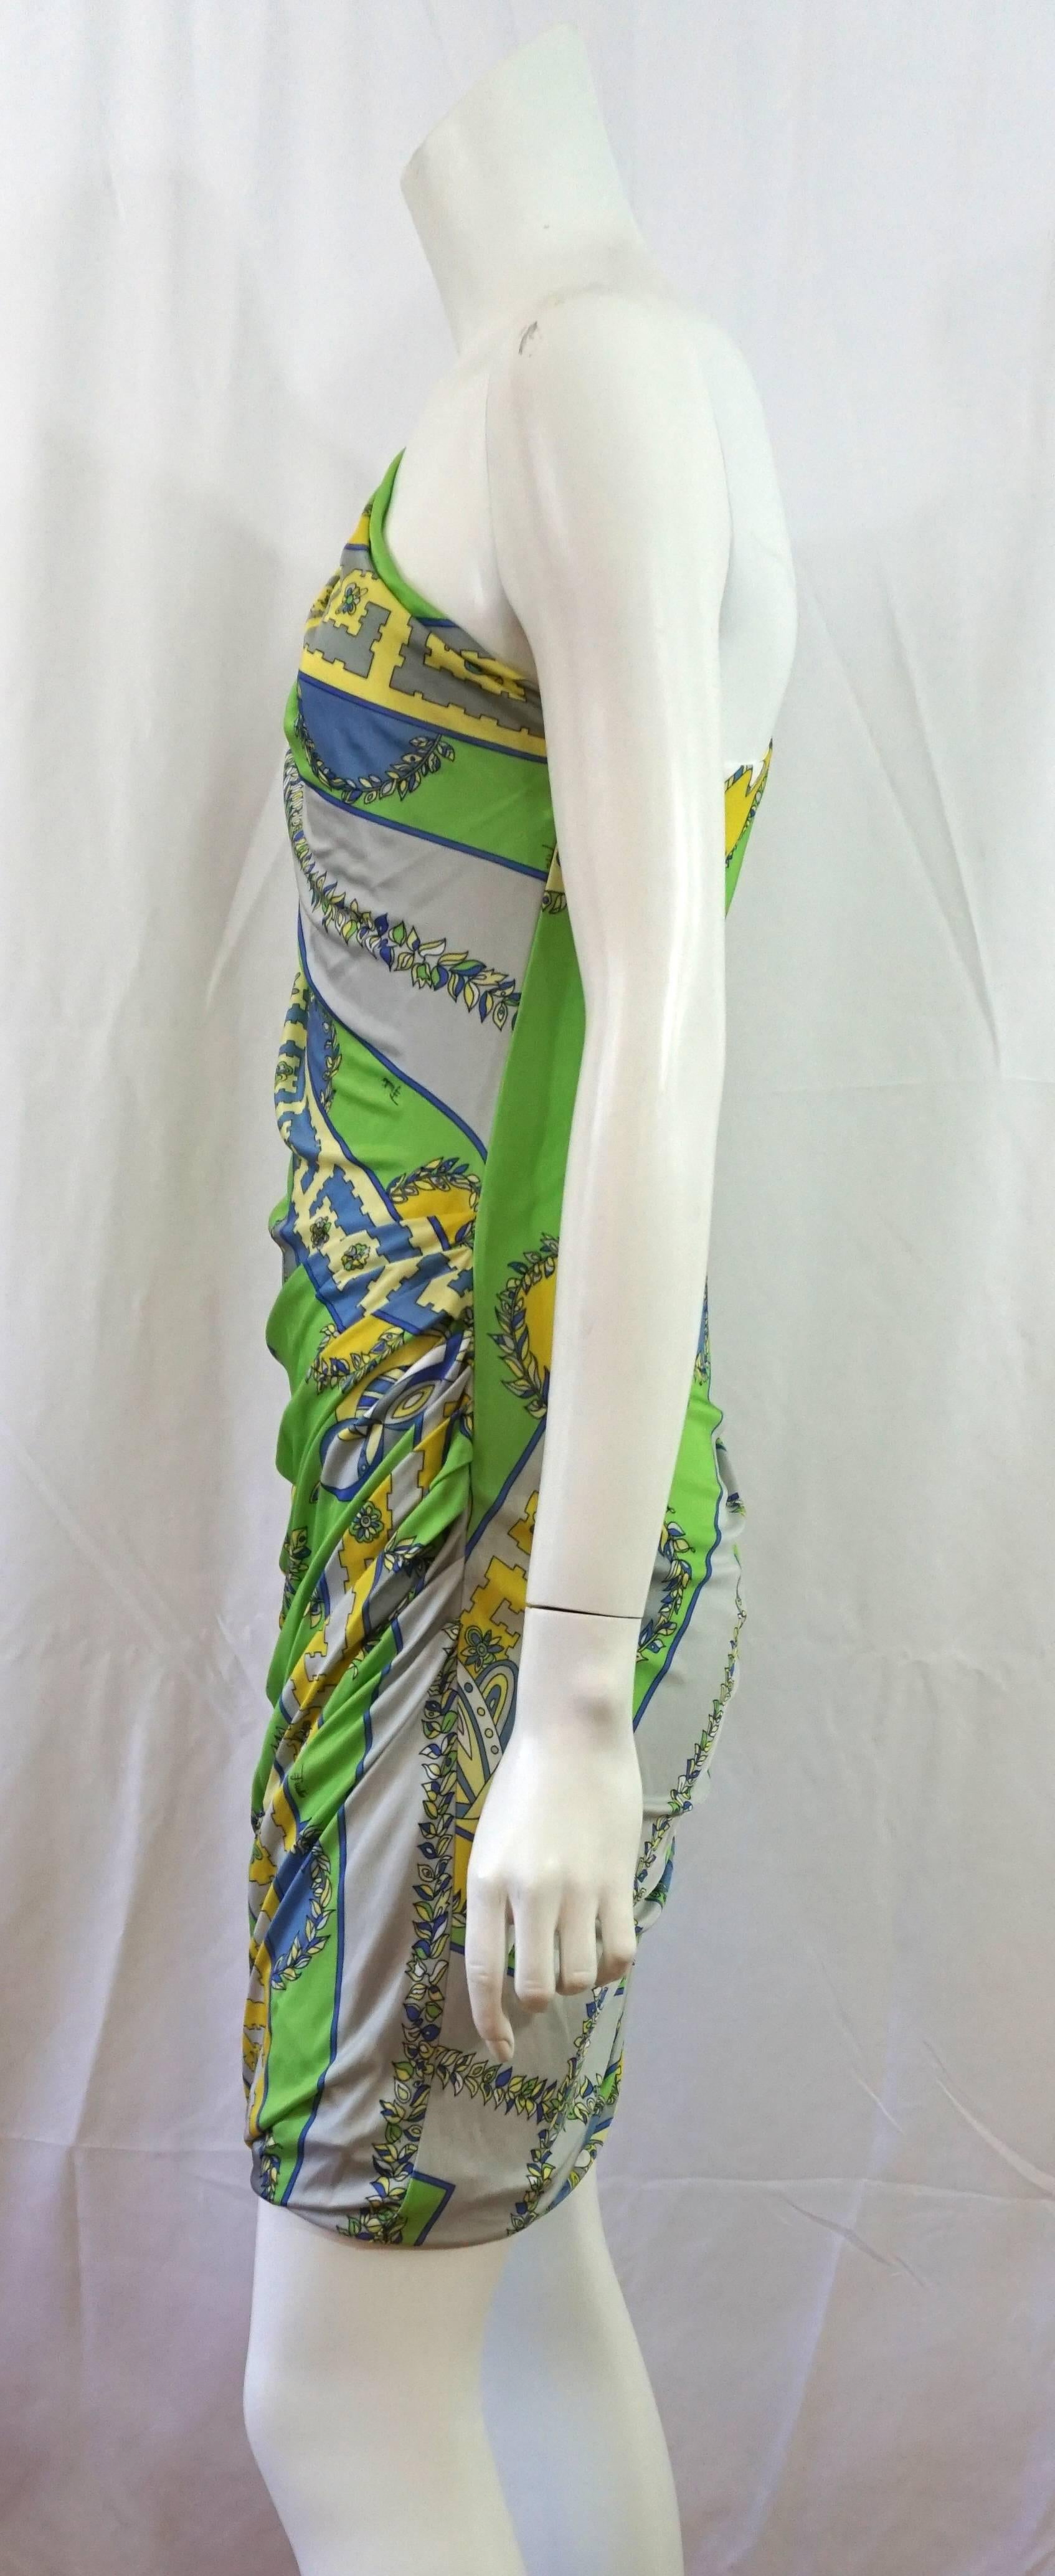 Emilio Pucci Green/Blue/Yellow One Shoulder Dress-42  This dress is draped starting from the right shoulder across and then again from the left hip across with ruching along the front and back of the dress.  The pattern is like a greek key and olive